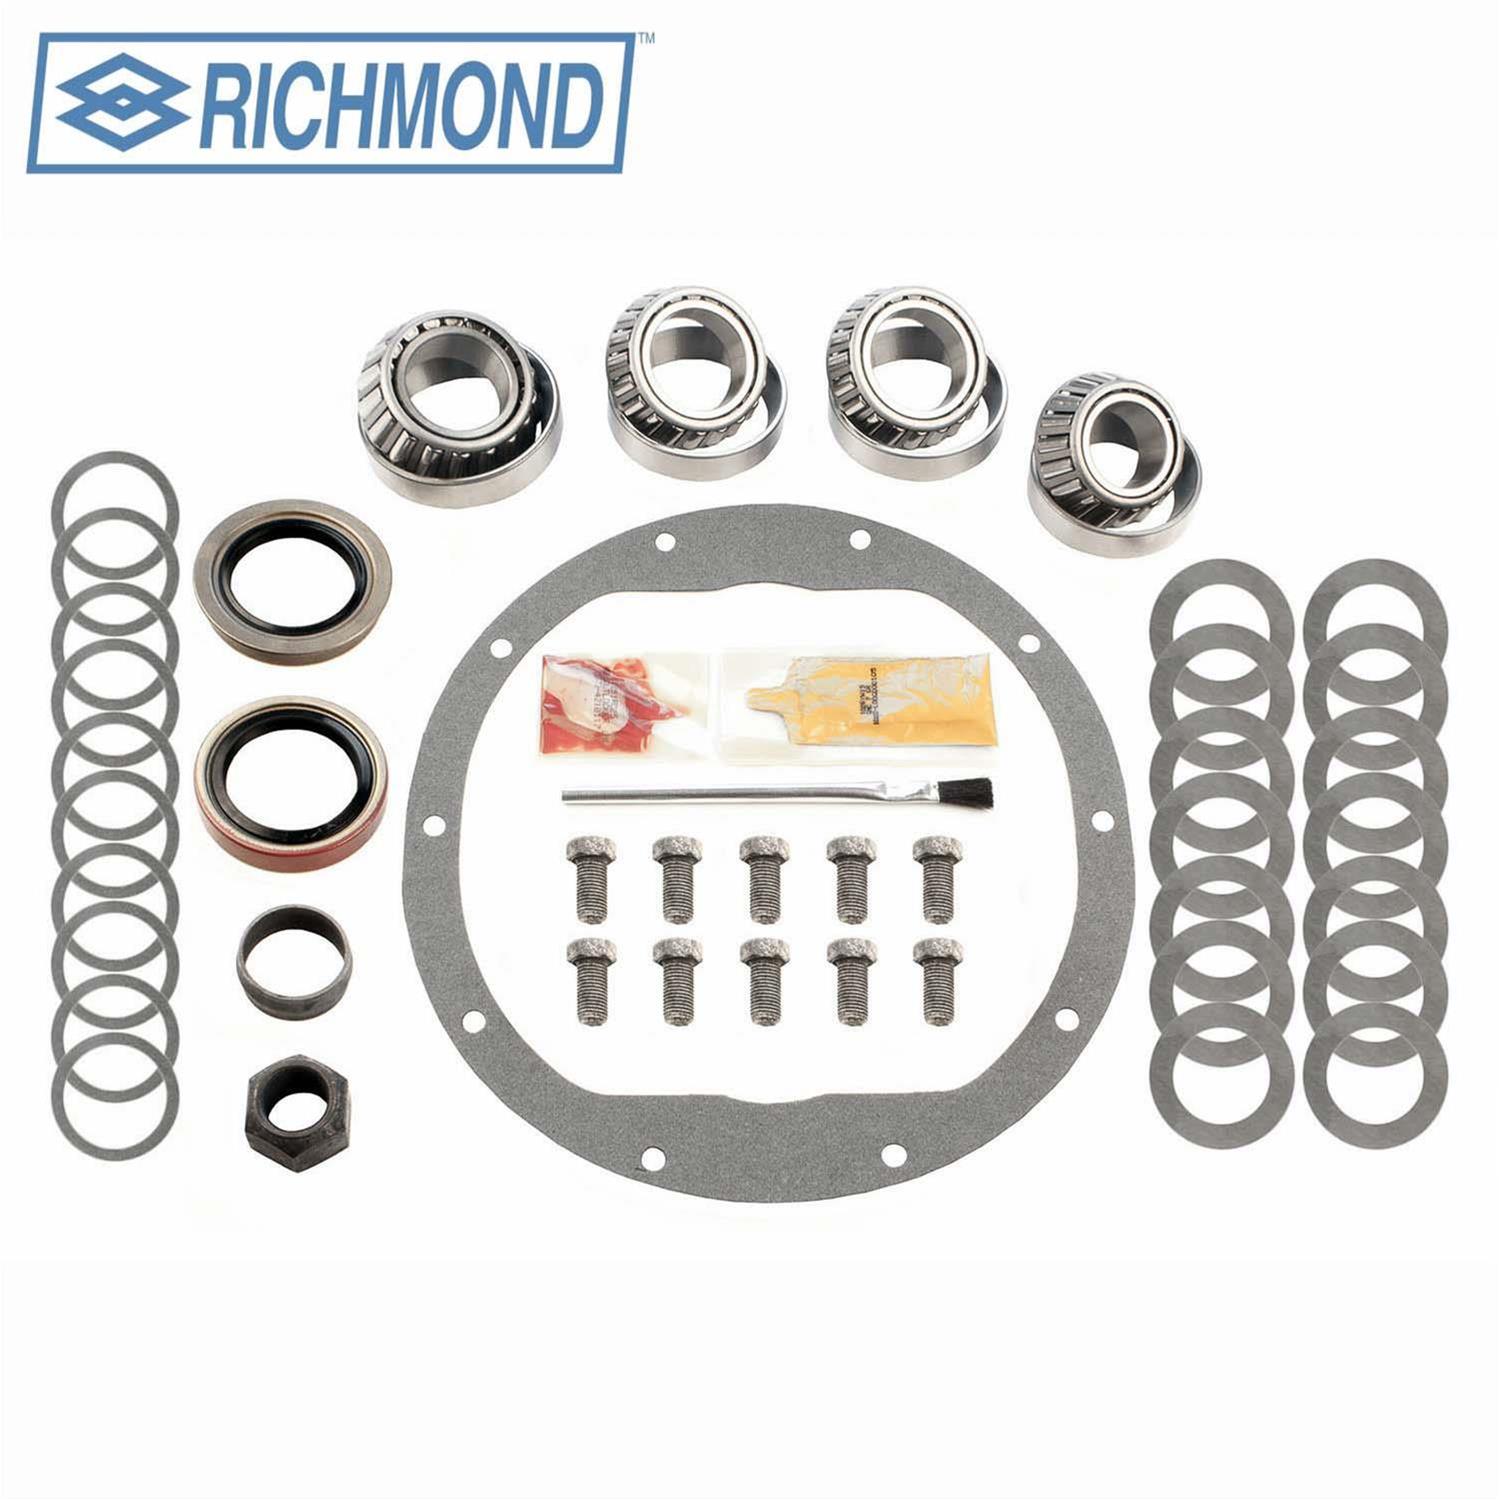 RICHMOND 4.62 RING AND PINION & MASTER INSTALL KIT TIMKEN FITS FORD 8 inch 